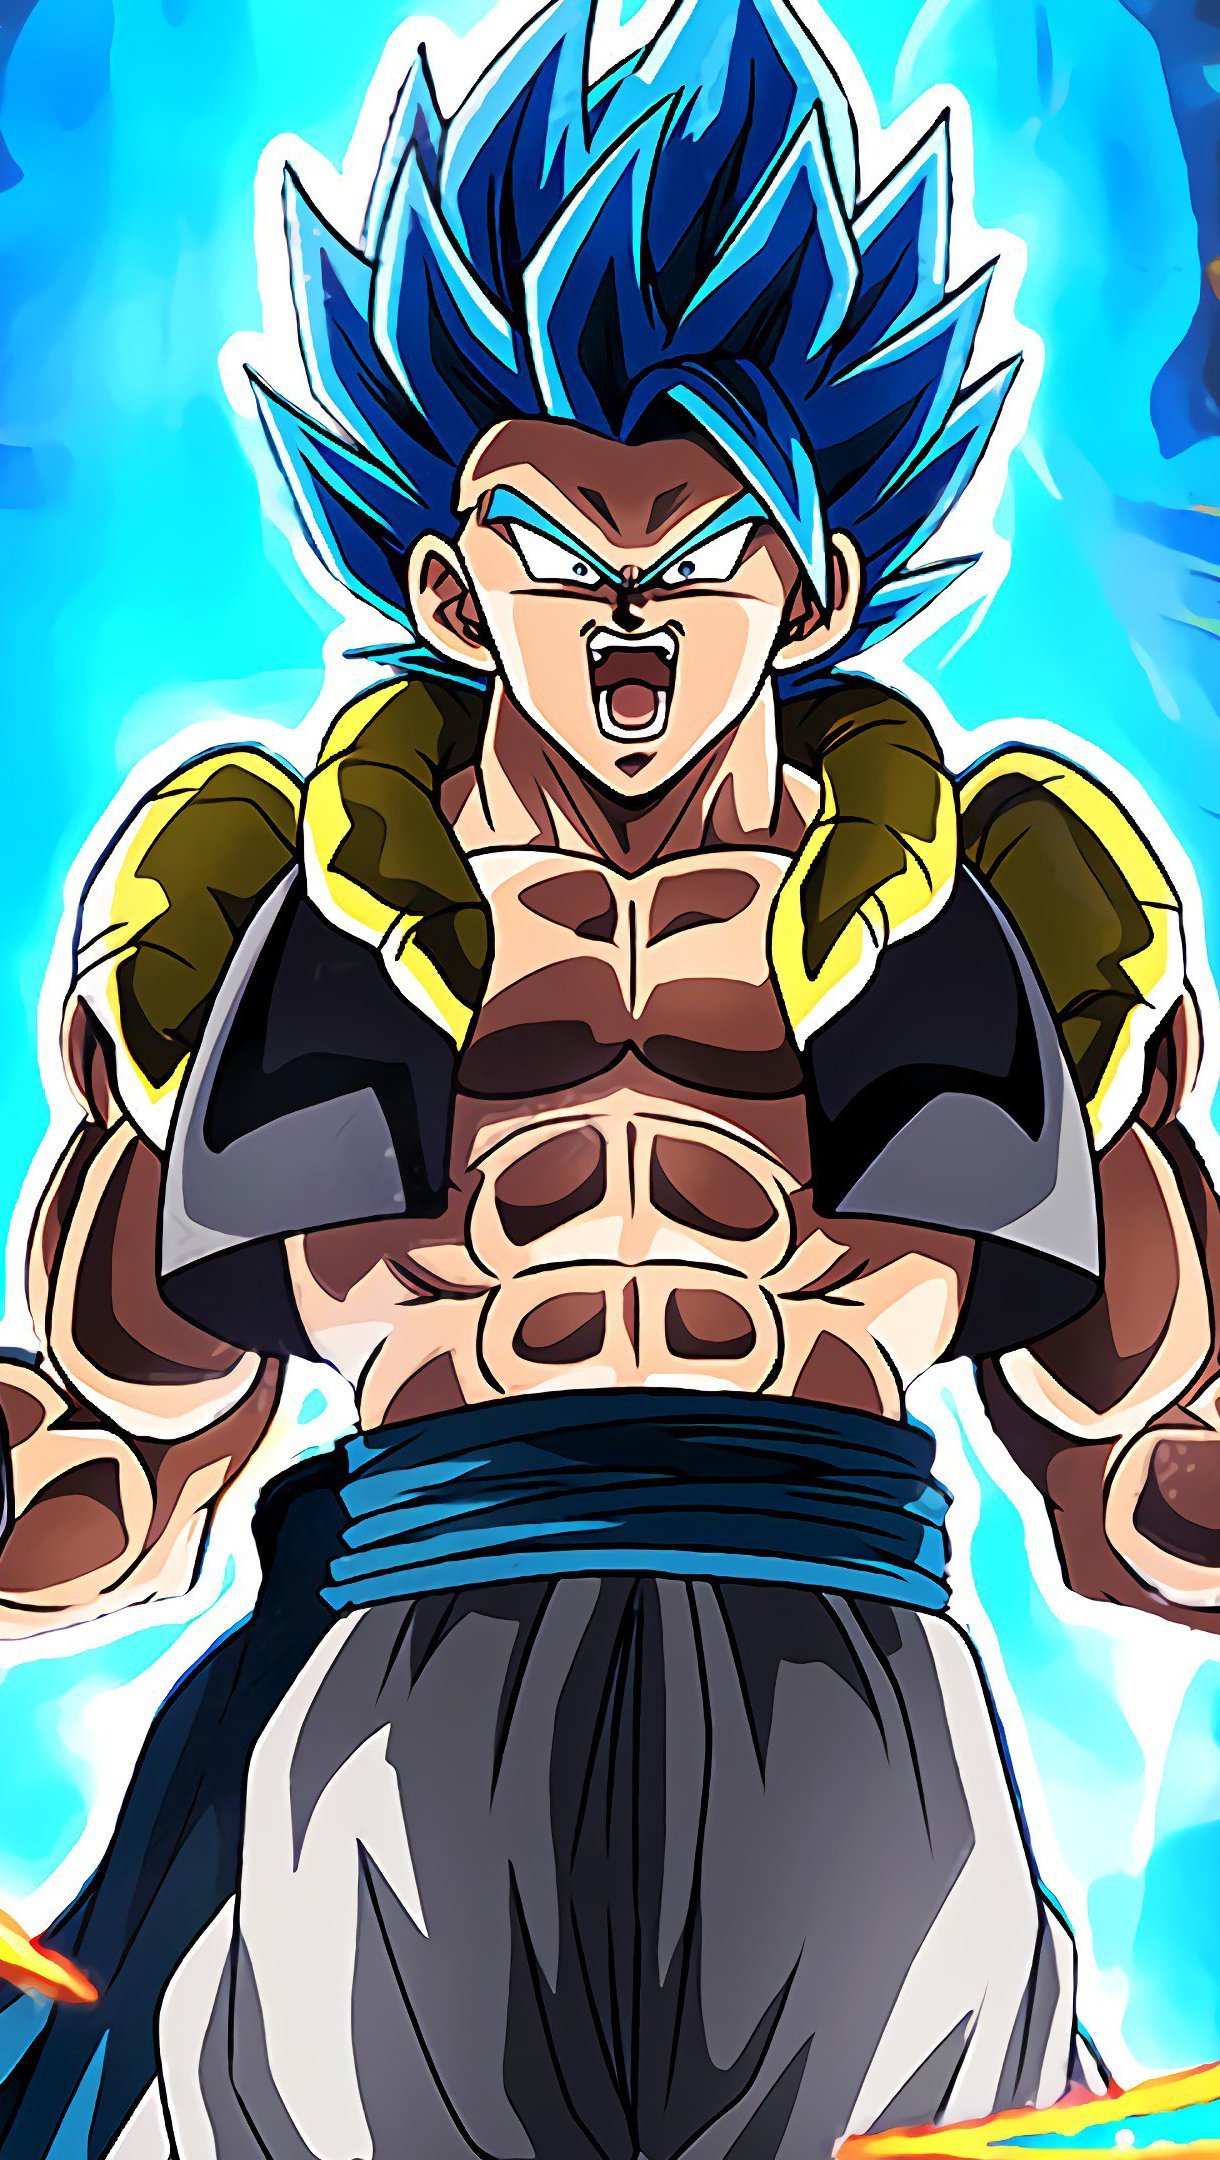 iPhone Gogeta Wallpaper Discover more anime Dragon Ball Dragon Ball    Dragon ball z iphone wallpaper Dragon ball super wallpapers Dragon ball  wallpaper iphone